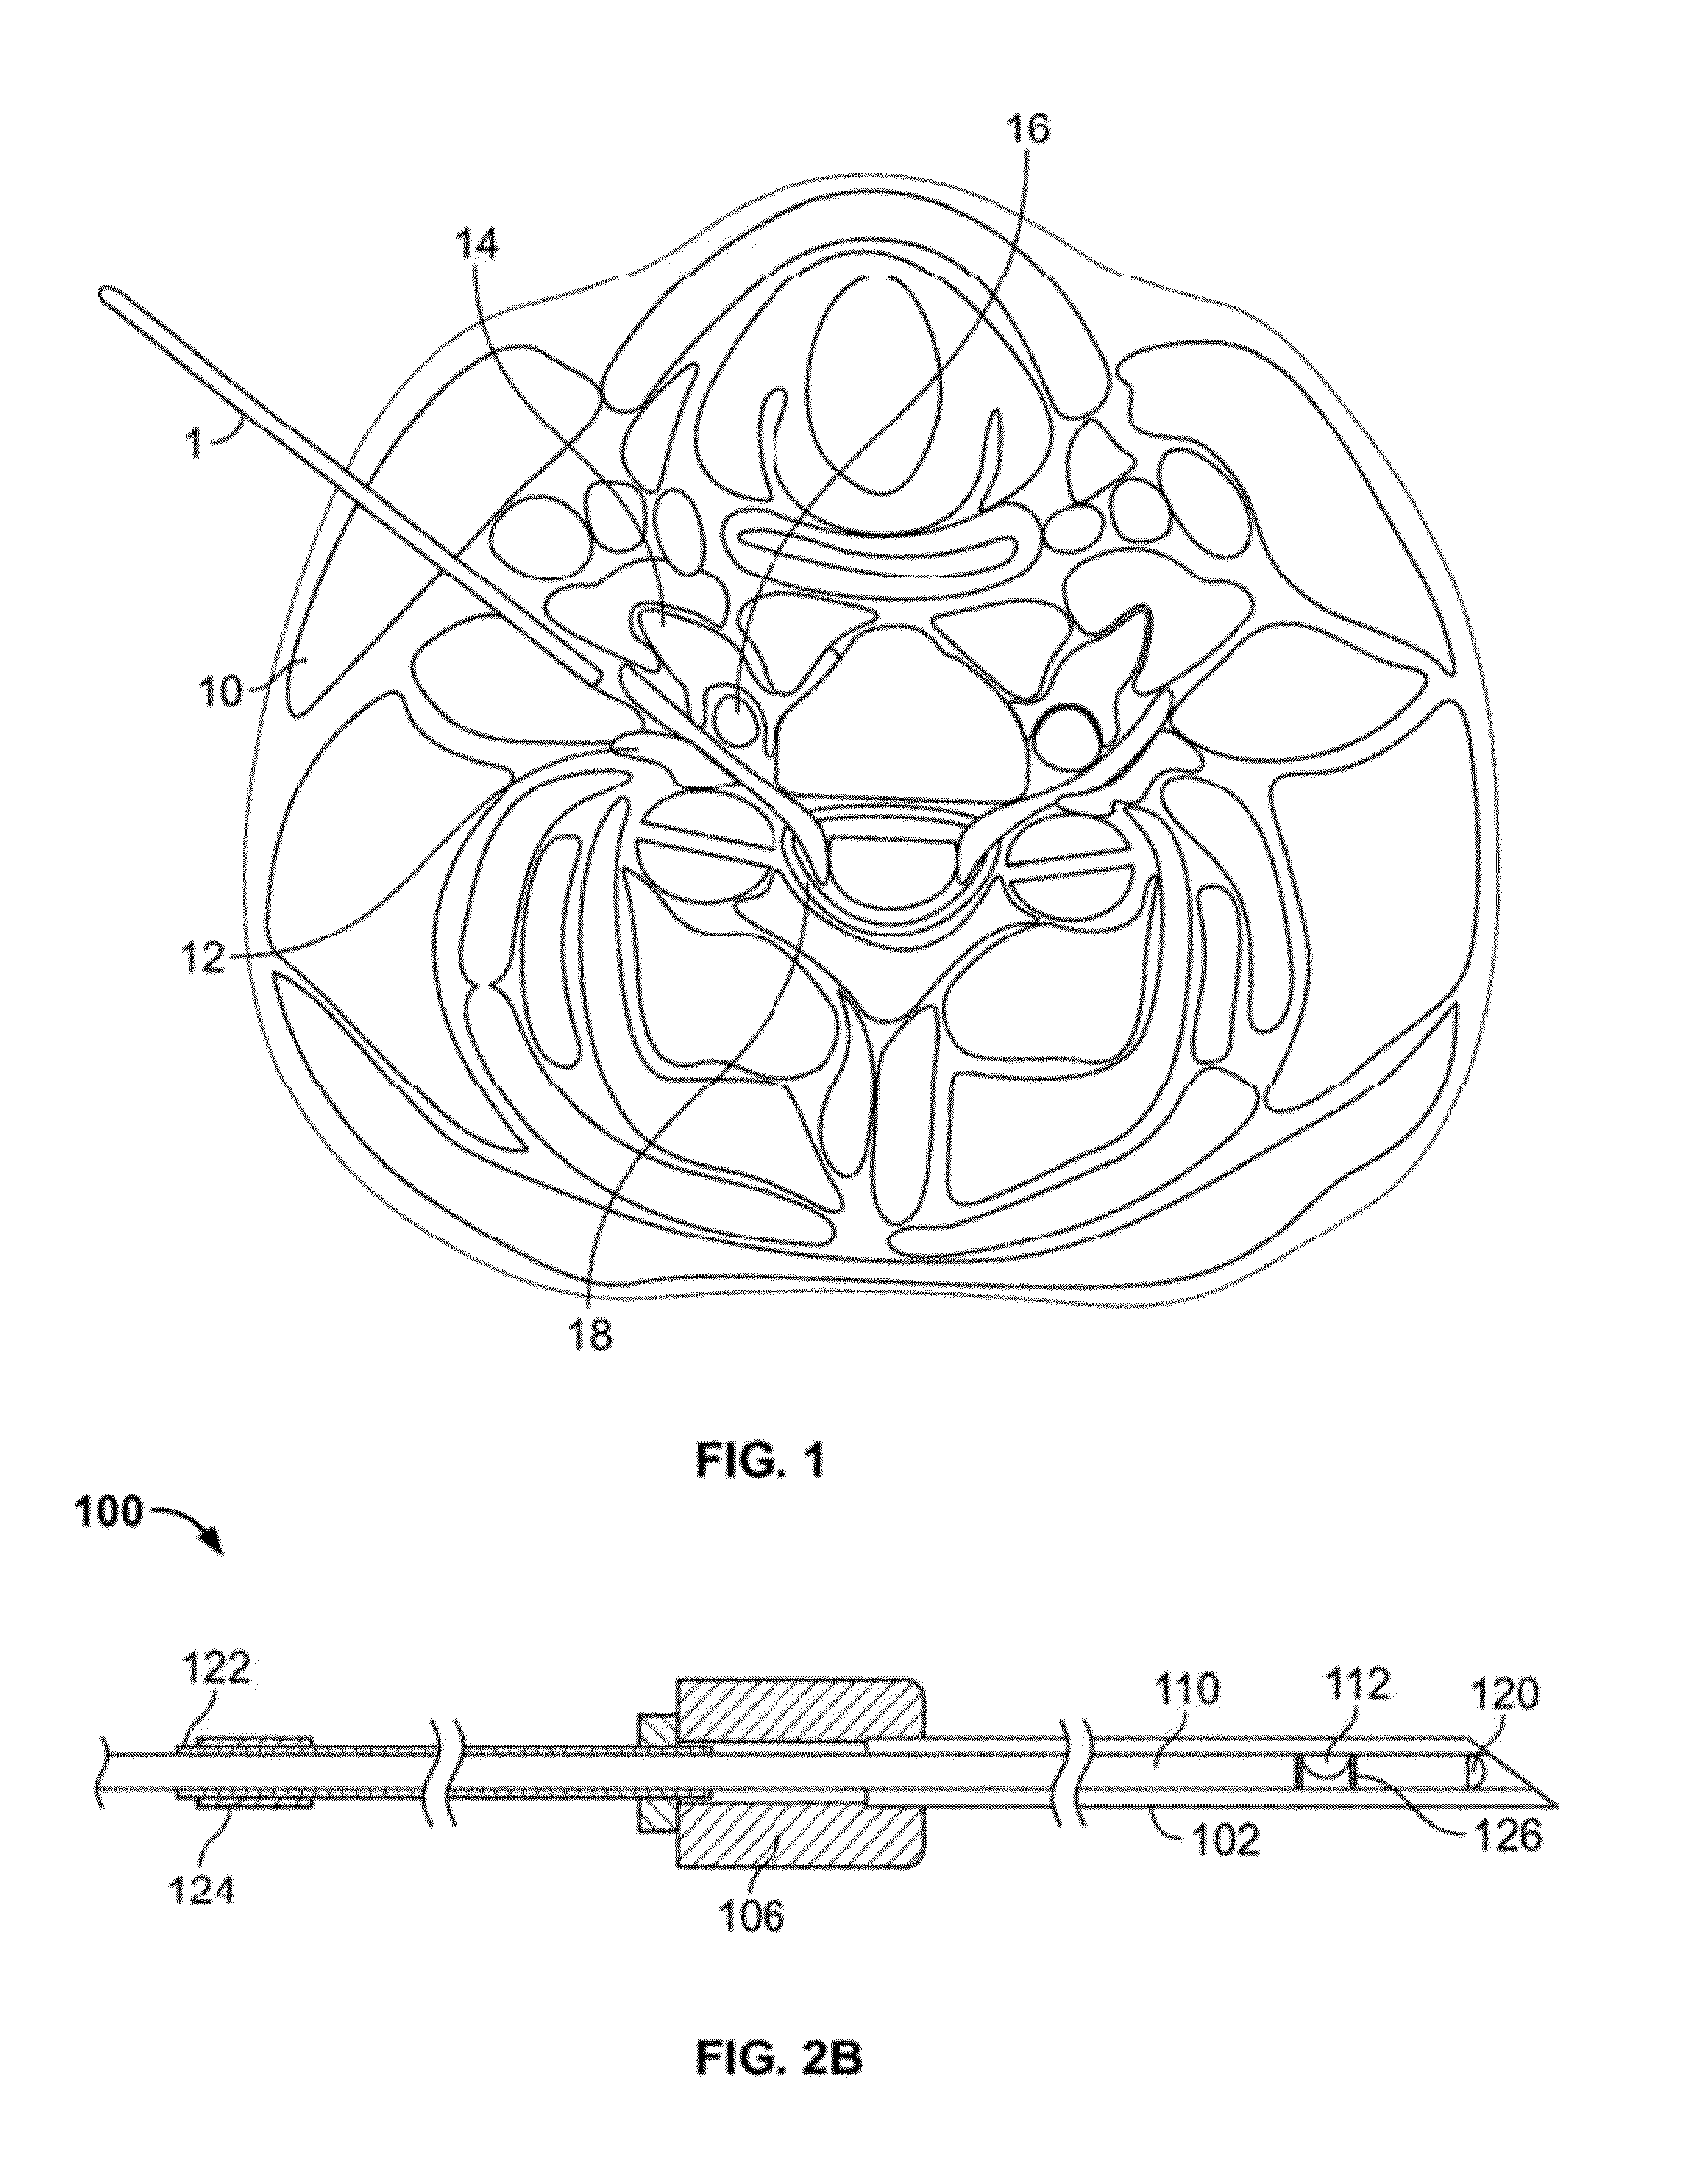 Method of accessing two lateral recesses